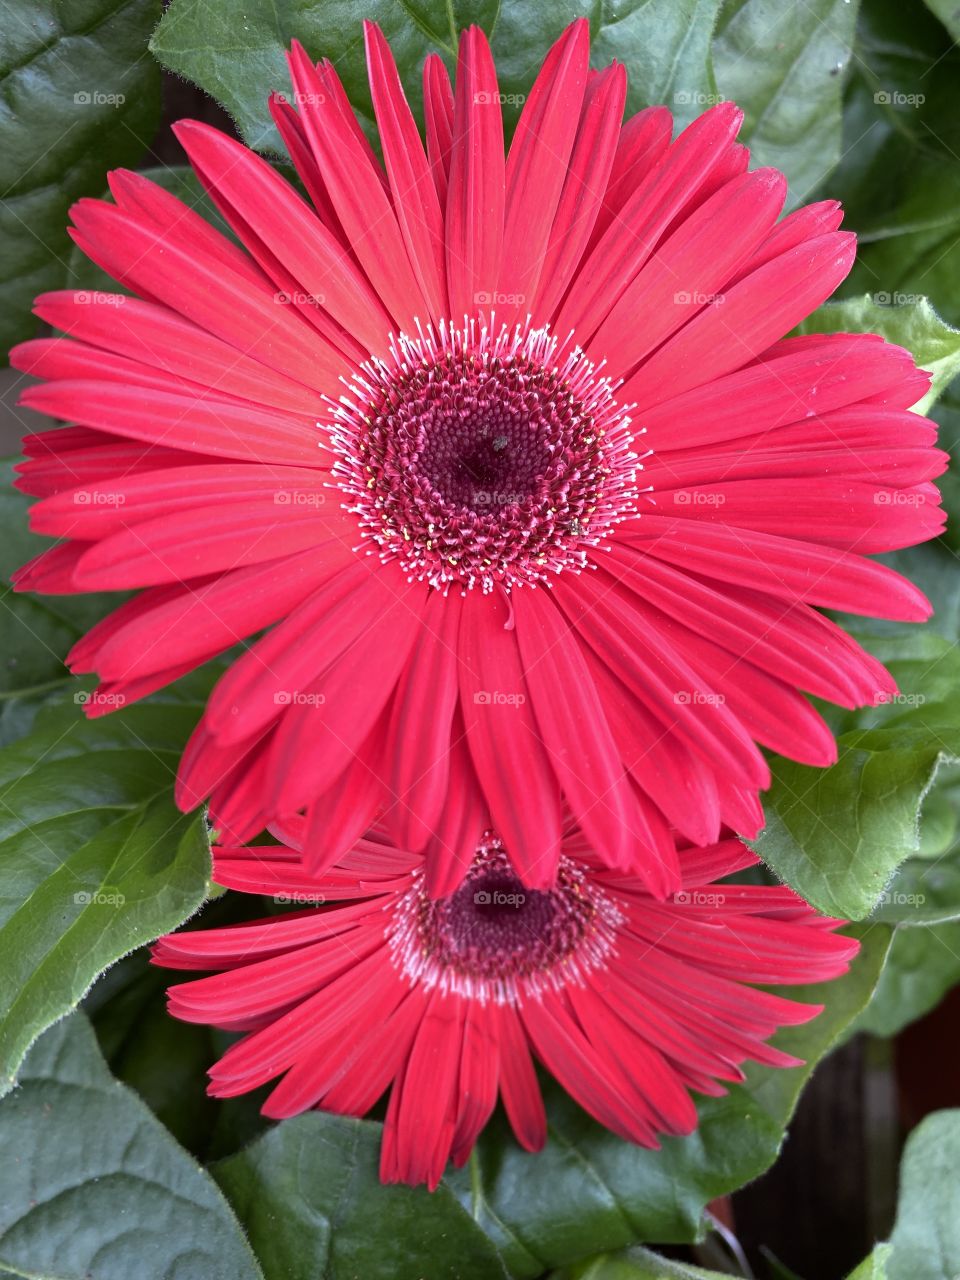 Some bright pink ”gerbera” giving the viewer a stunning view of this sumptuous plant.